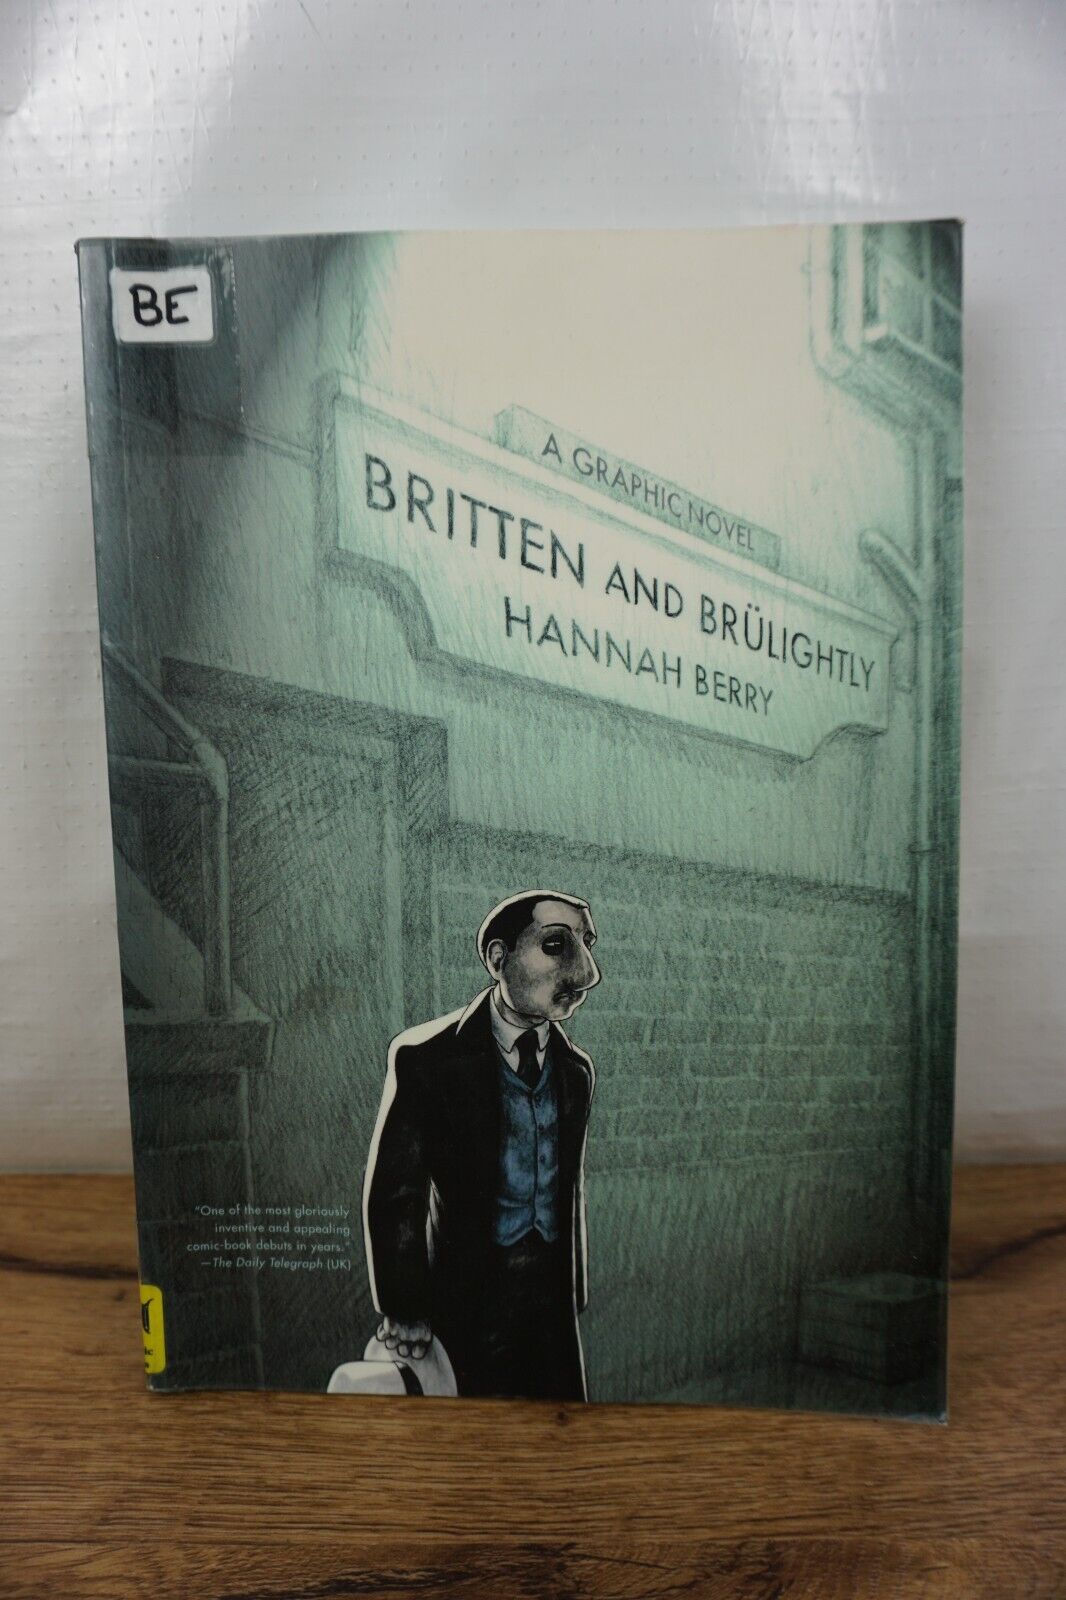 Britten and Brulightly by Hannah Berry (2009) PB